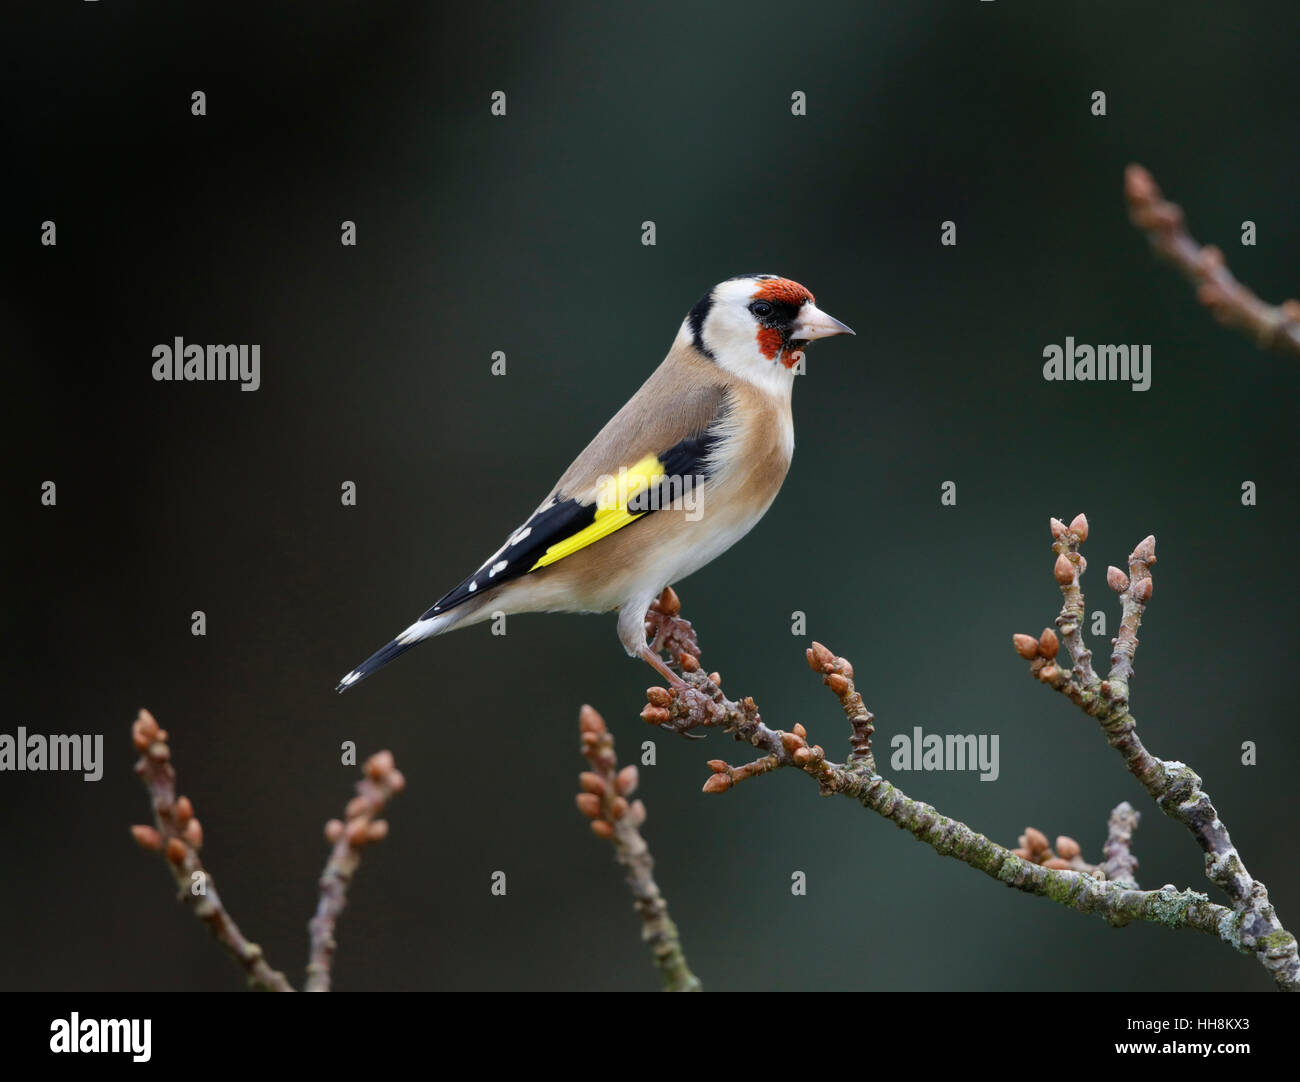 Goldfinch, Carduelis carduelis, on winter branch Stock Photo